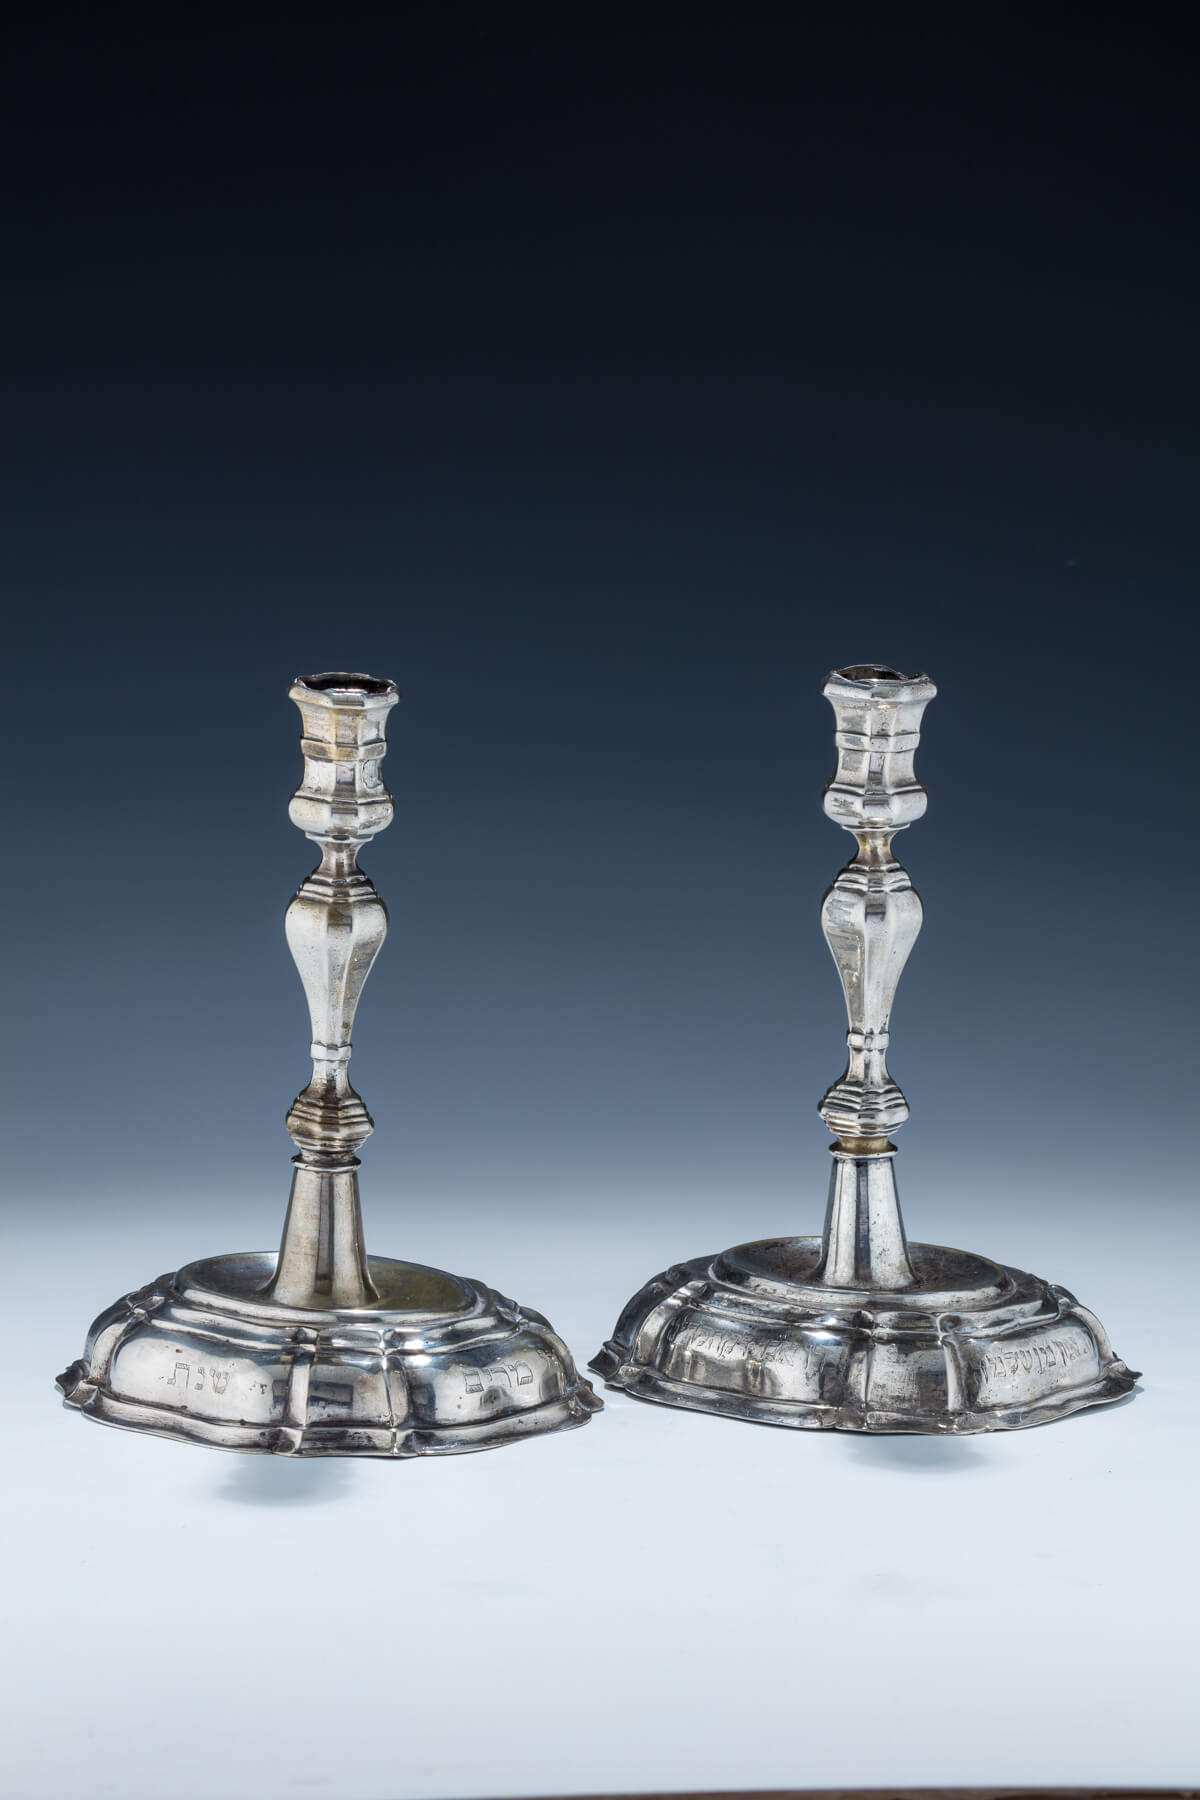 124. An Exceptionally Rare Pair of Silver Candlesticks